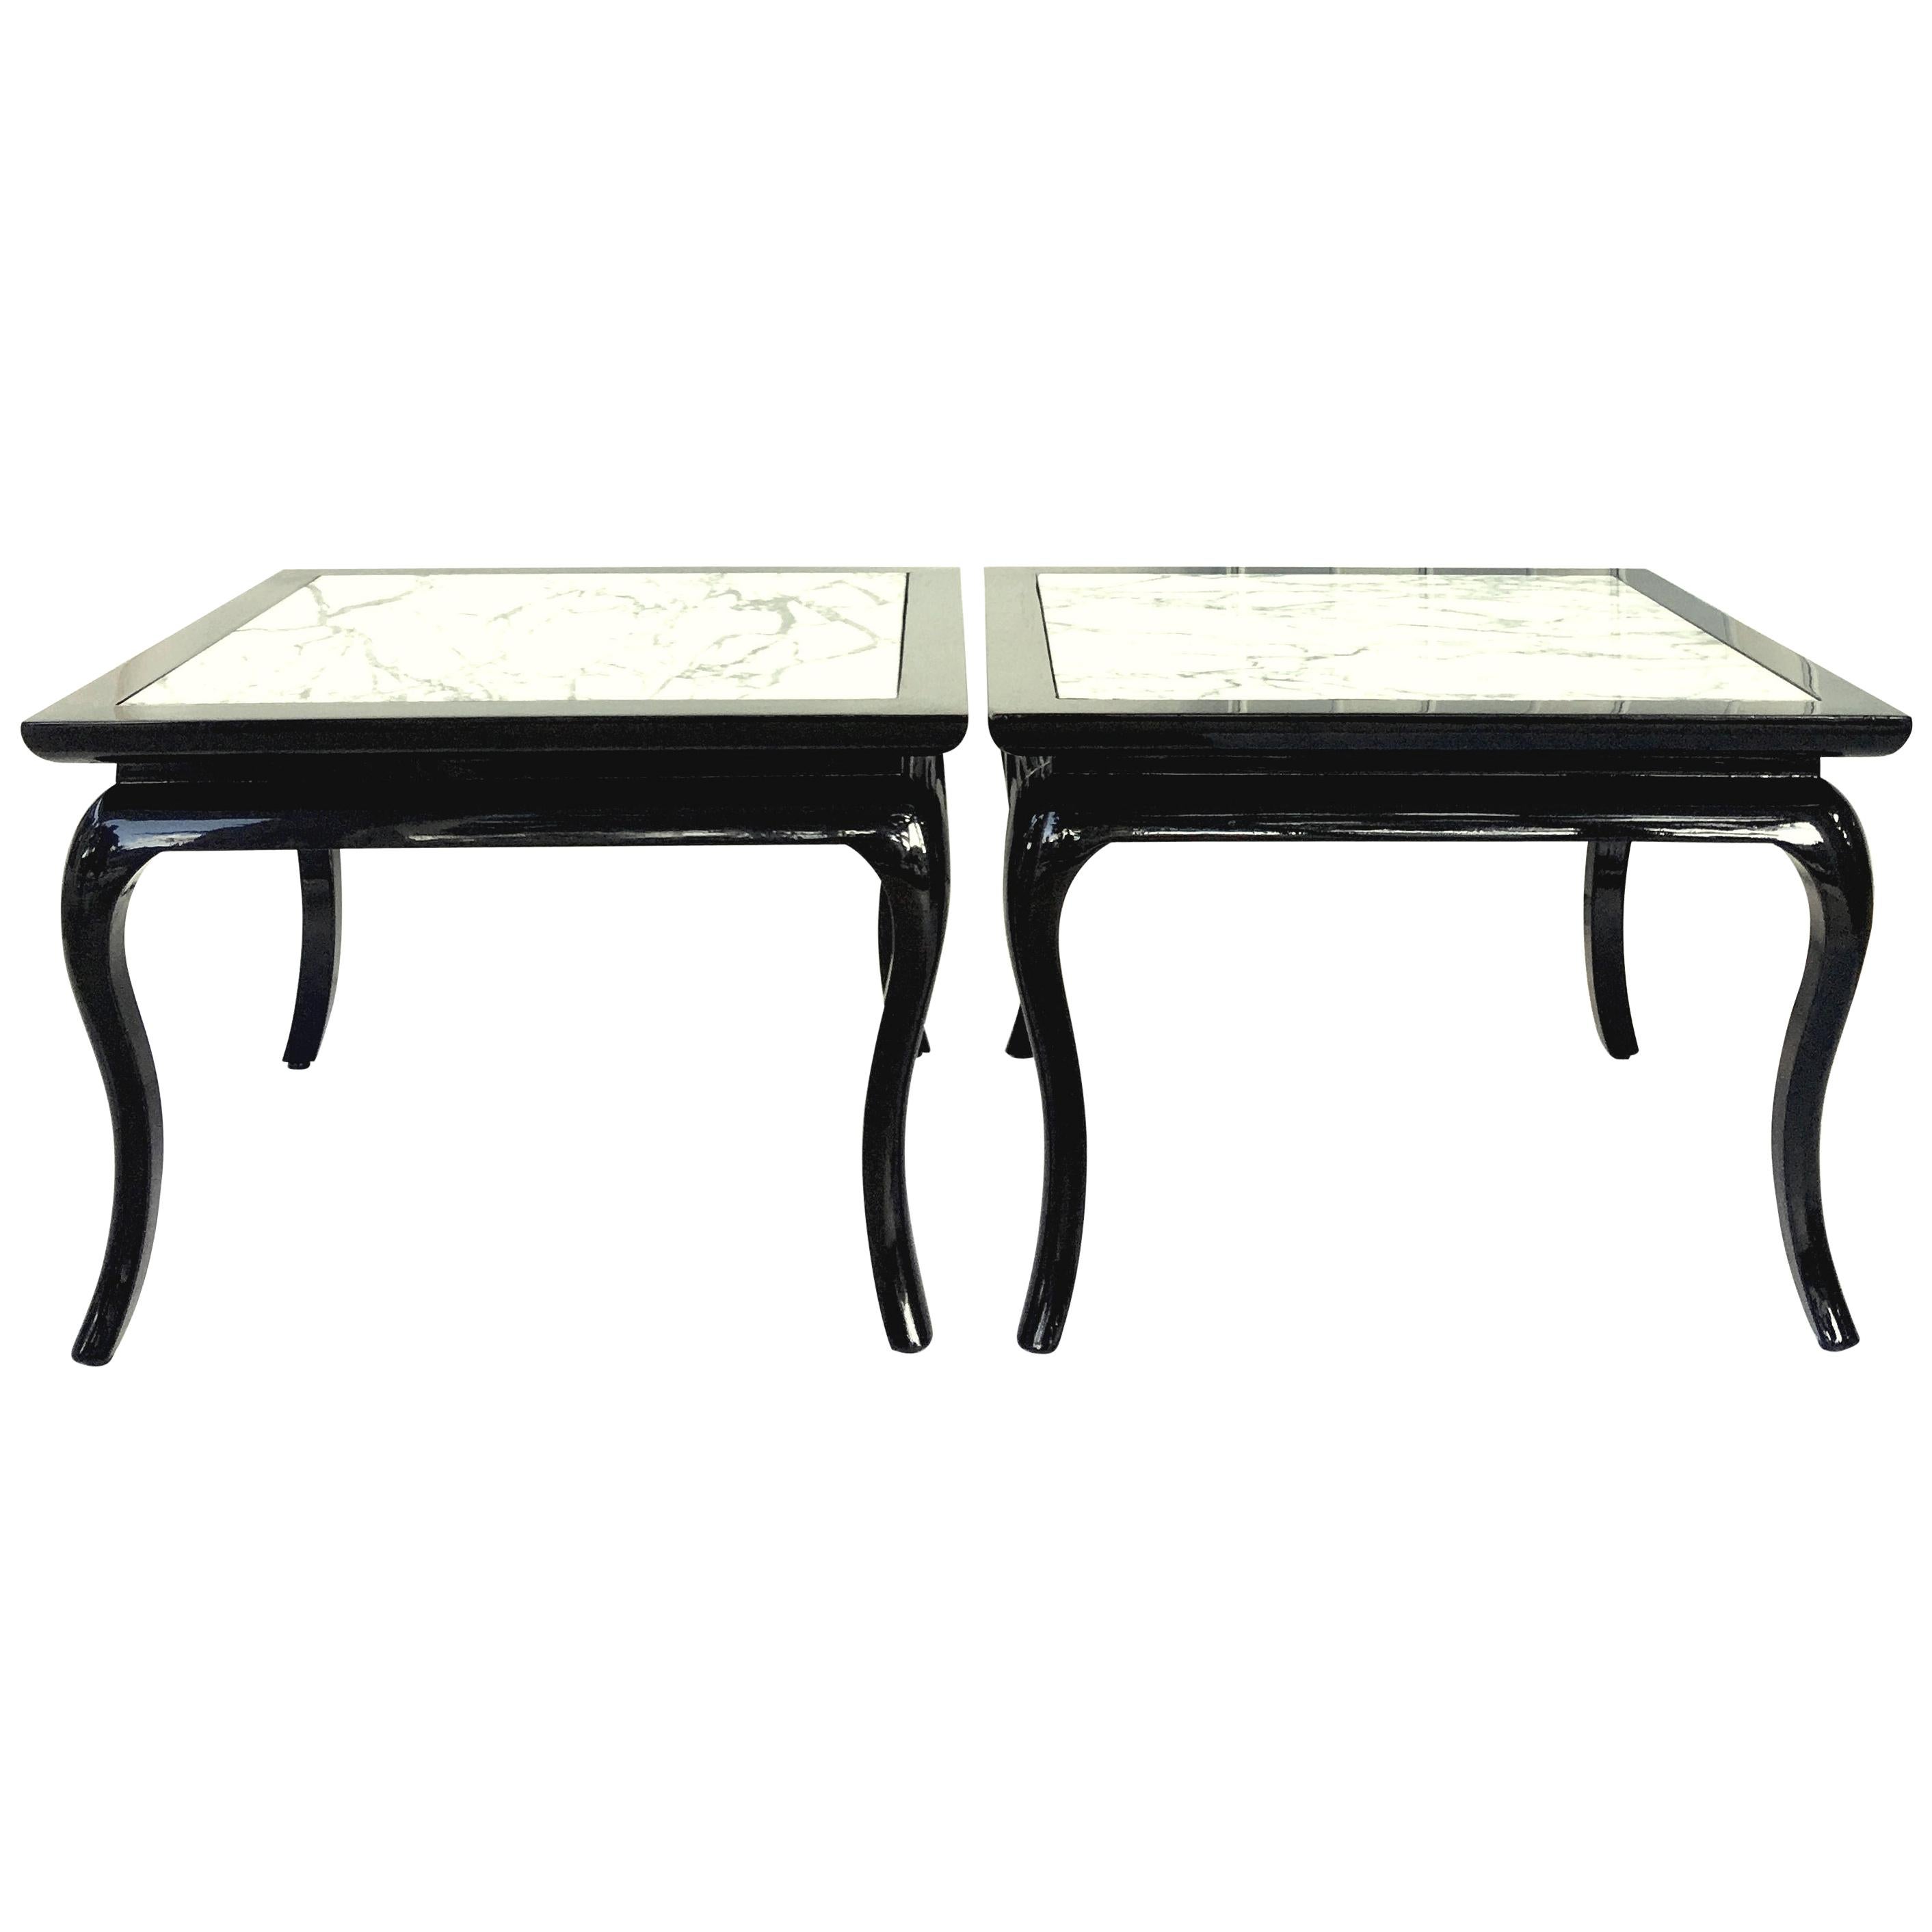 Mid-20th century pair of Hollywood Regency style maple black lacquer and polished Carrara marble inset top side tables. These finely crafted, substantial side tables have been newly and professionally lacquered to a high gloss black finish. The